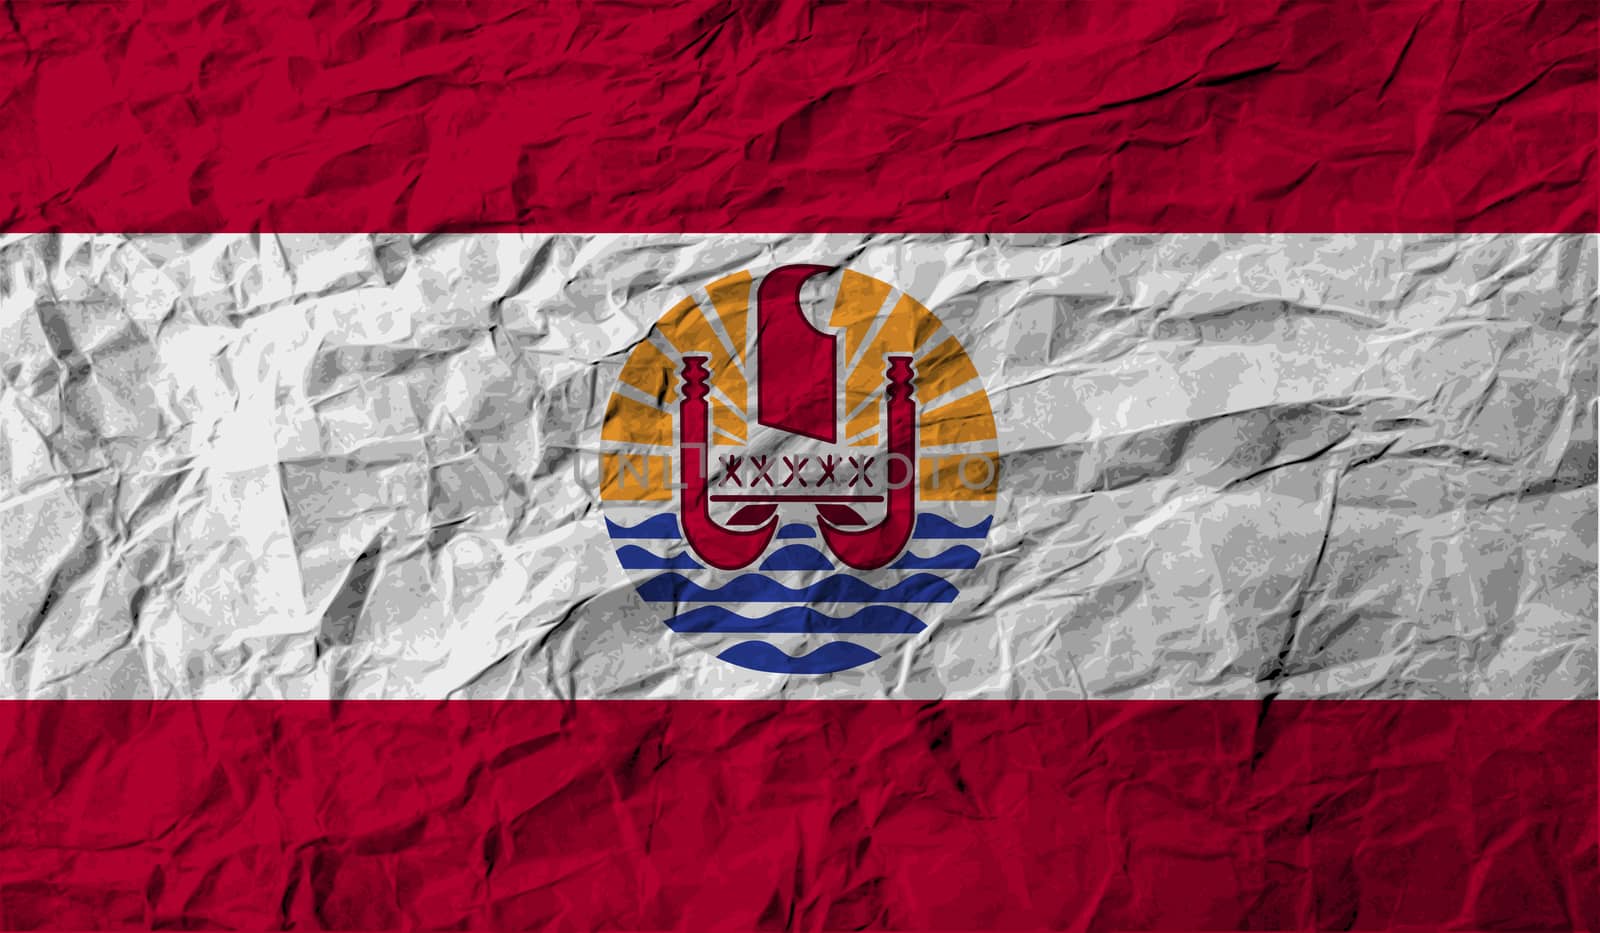 Flag of french polynesia with old texture.  illustration